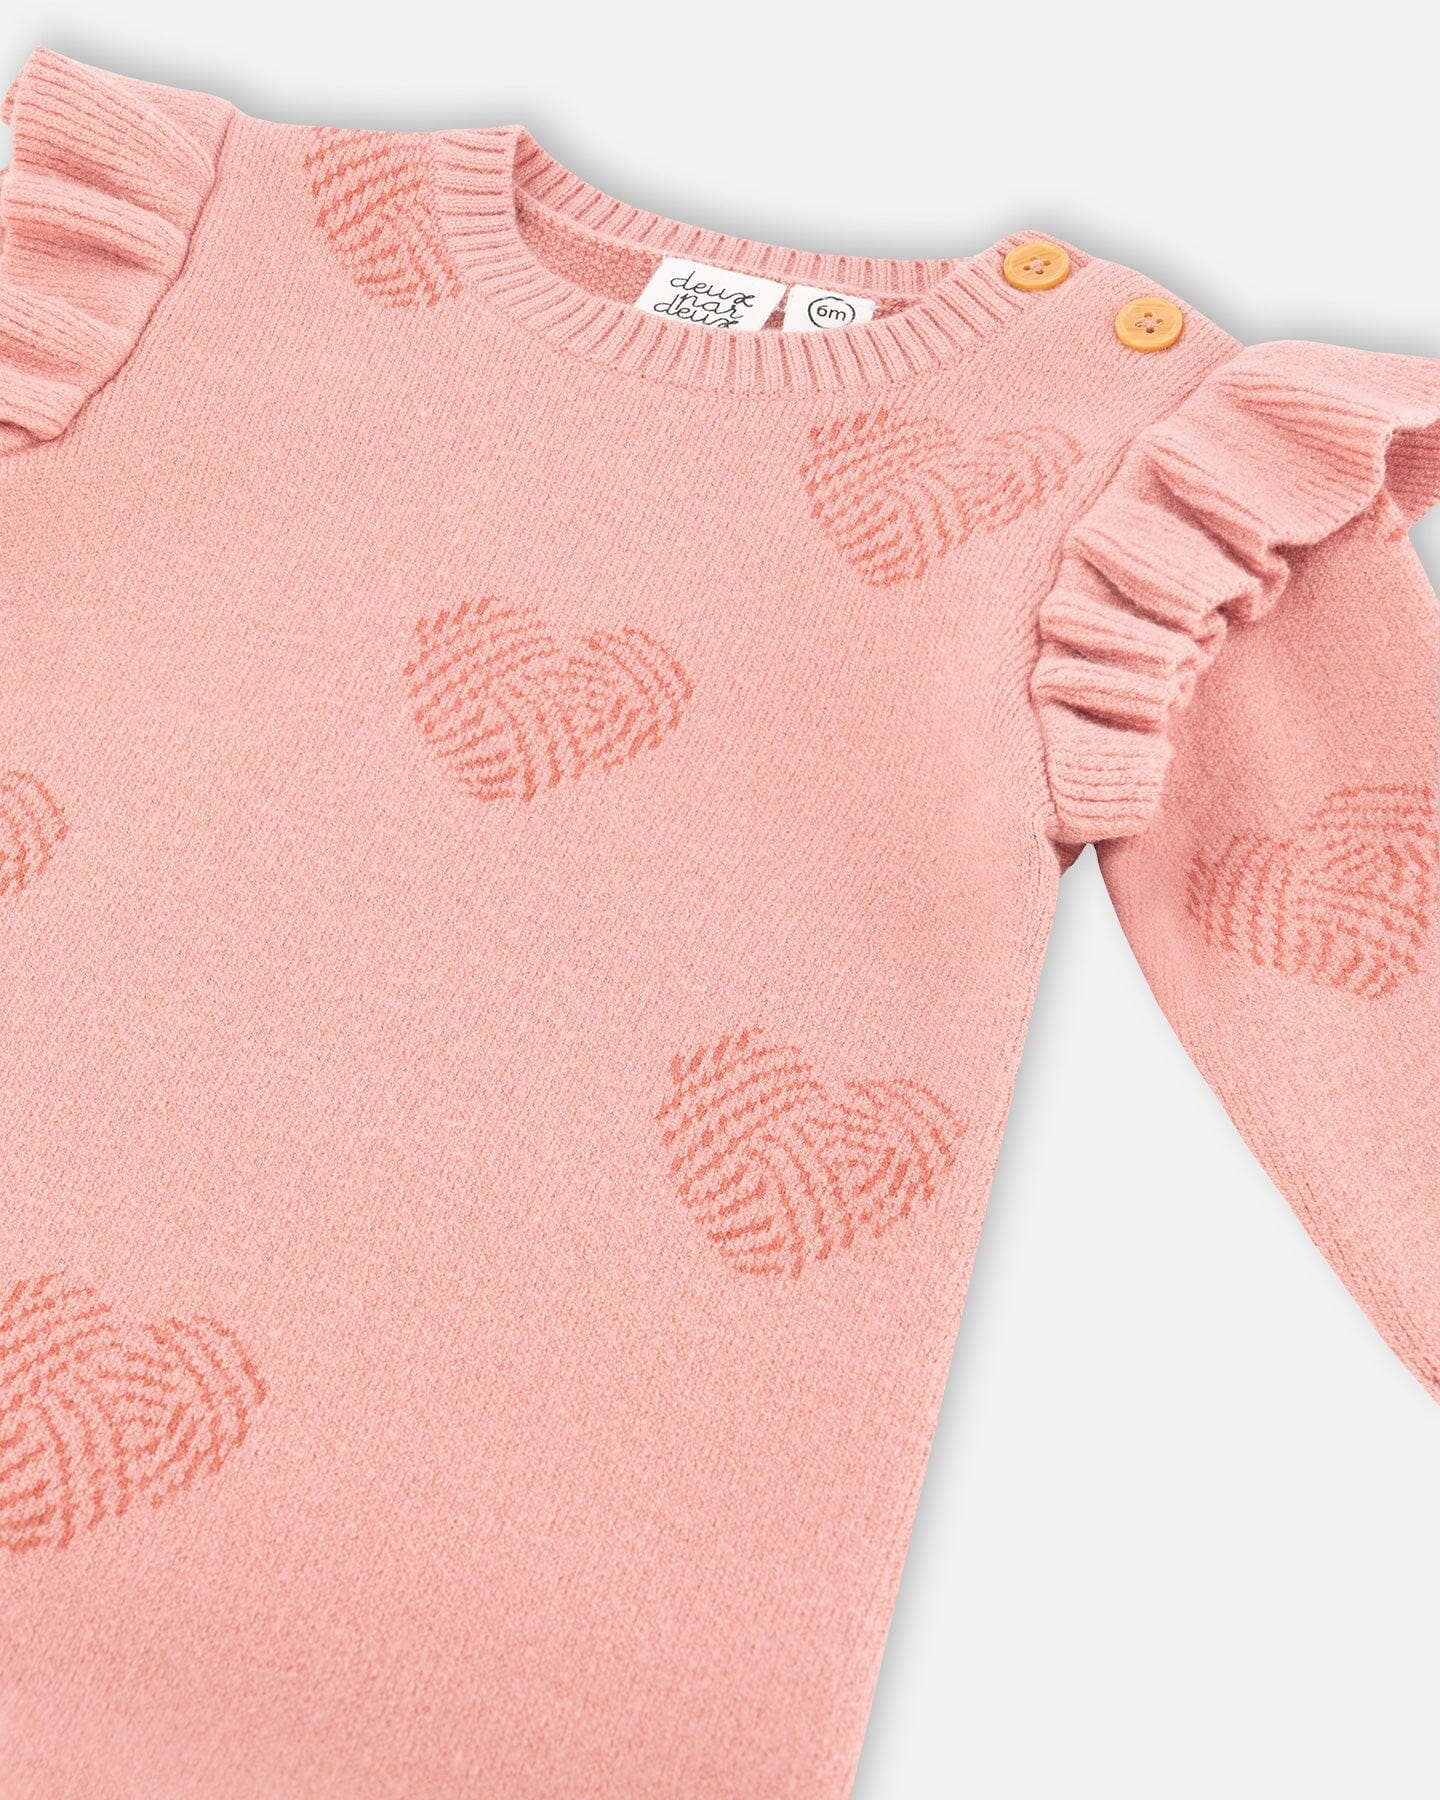 Knitted Jumpsuit With Jacquard Powder Pink Little Heart Of Wool - F20BT41_622